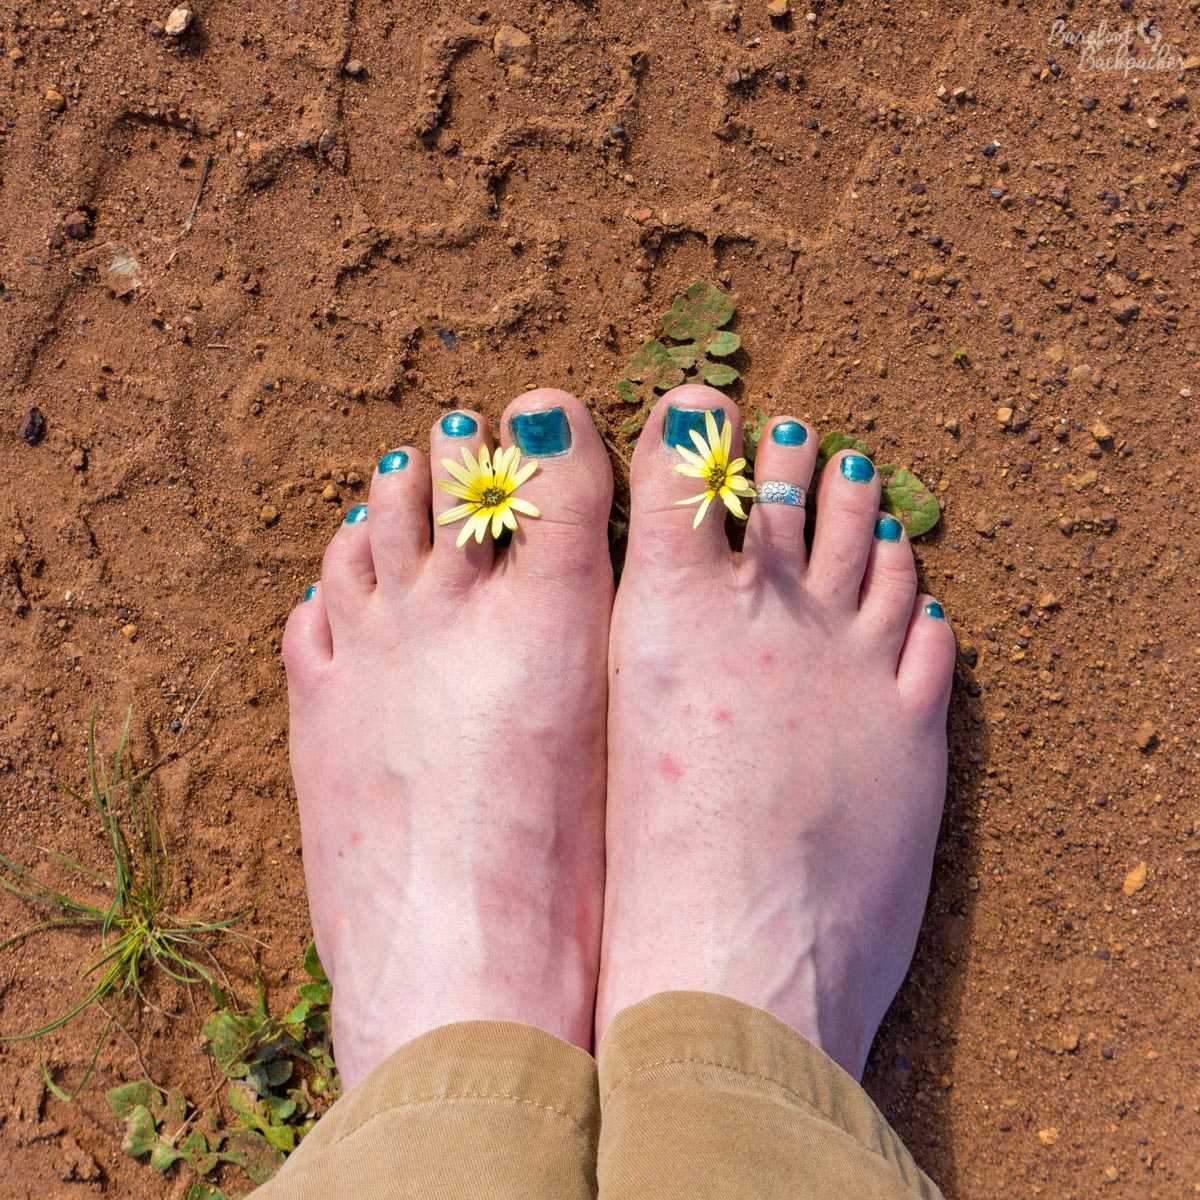 Two bare feet on a dusty, stony, road in the Australian outback, with a couple of wldflowers growing in the road poking through between the toes. The toenails are painted in a sort of teal shade.